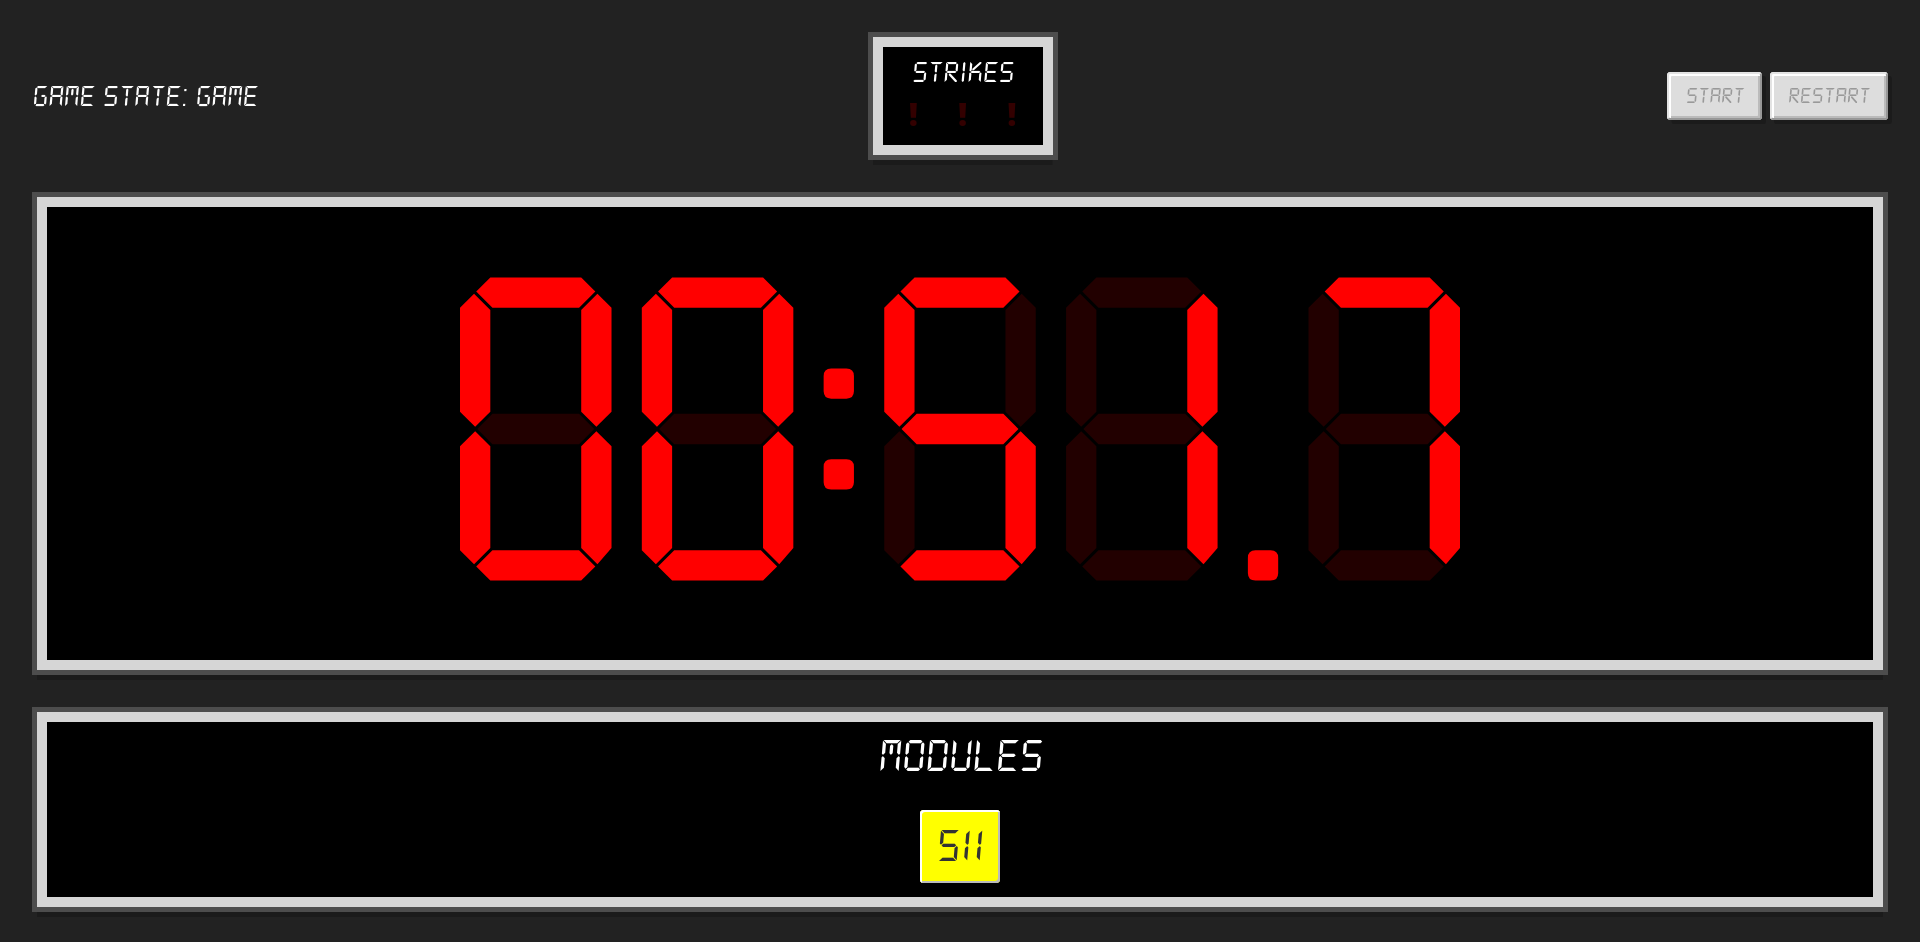 A screenshot of the OBUS controller web page, showing a countdown timer, a list of connected modules and the strikes